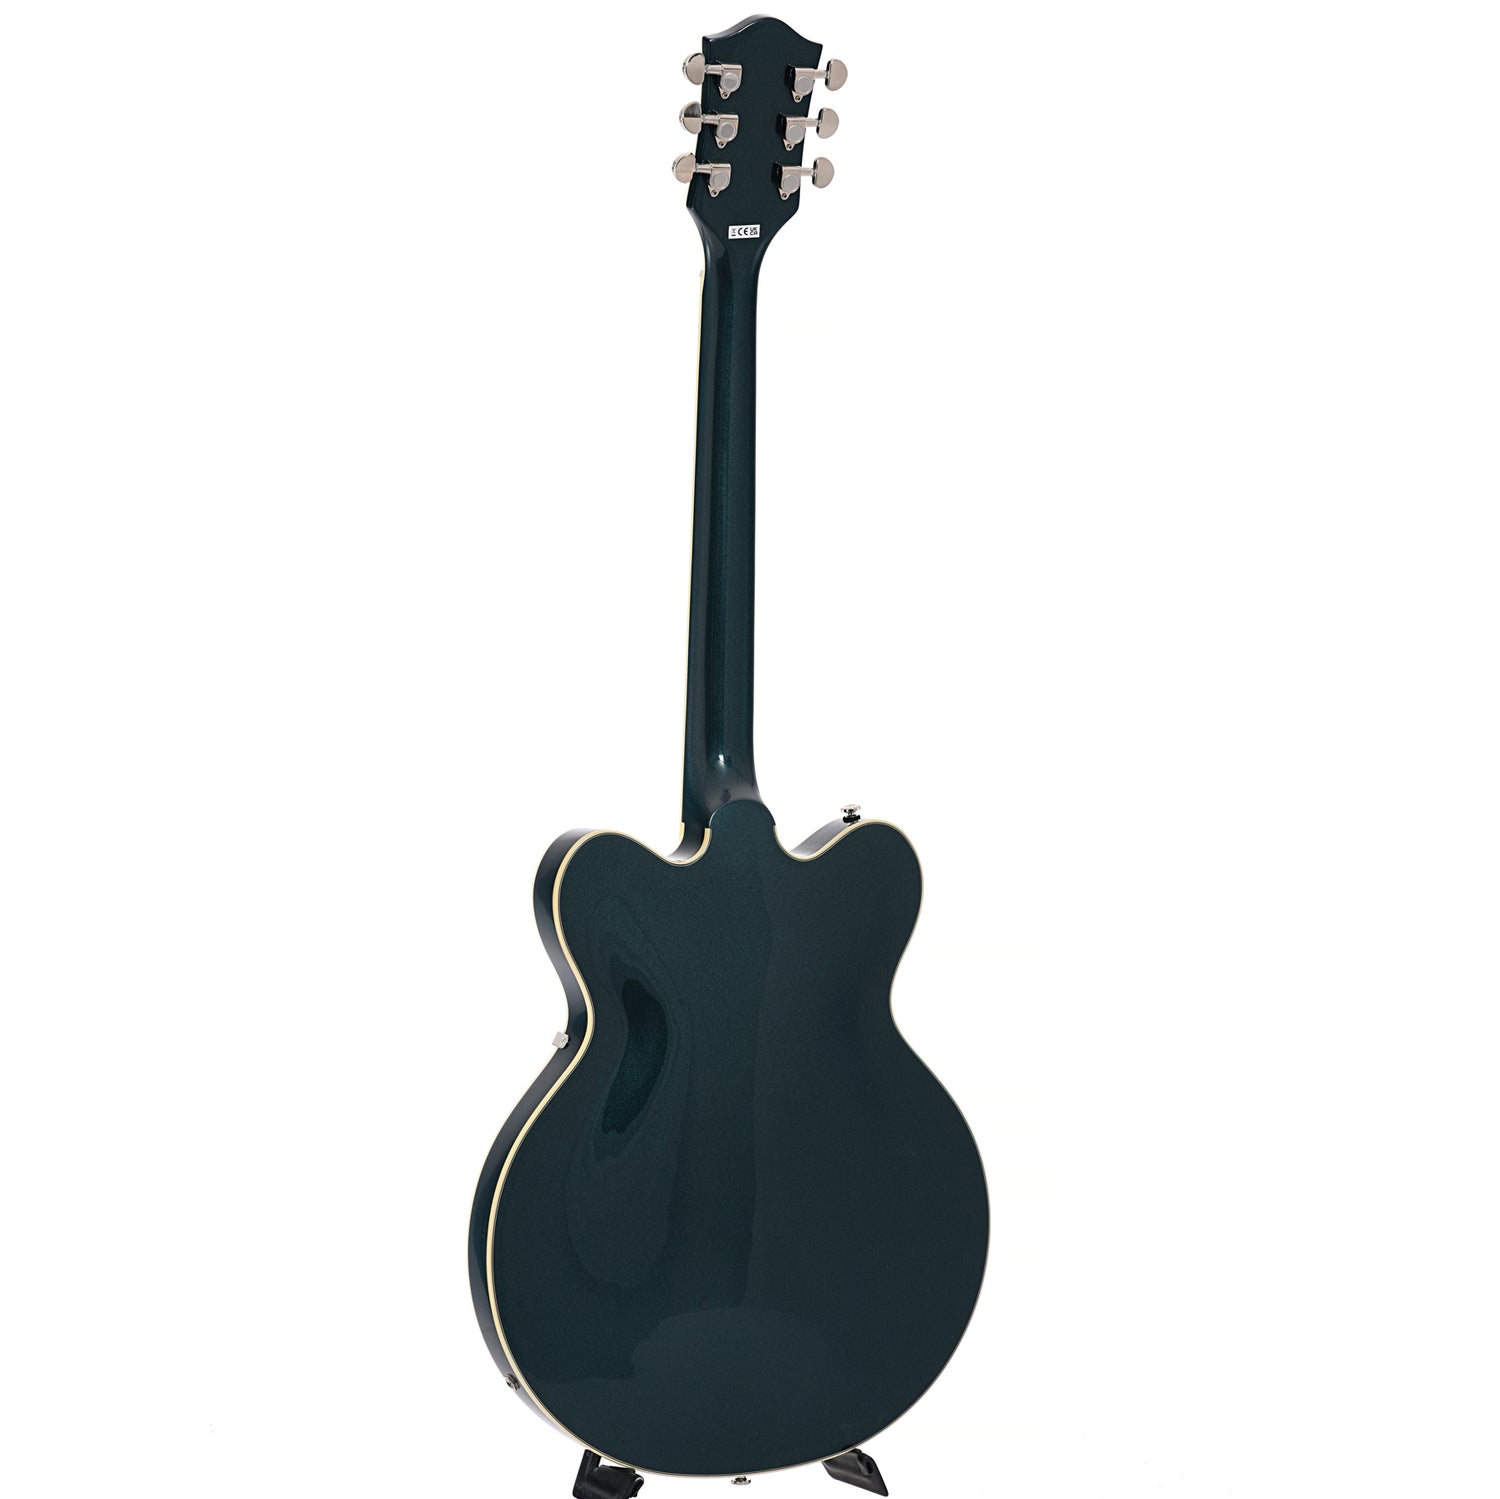 Image 12 of Gretsch G2622 Streamliner Center-Block Double Cutaway Hollow Body Guitar, Midnight Sapphire- SKU# G2622-MDSPH : Product Type Hollow Body Electric Guitars : Elderly Instruments